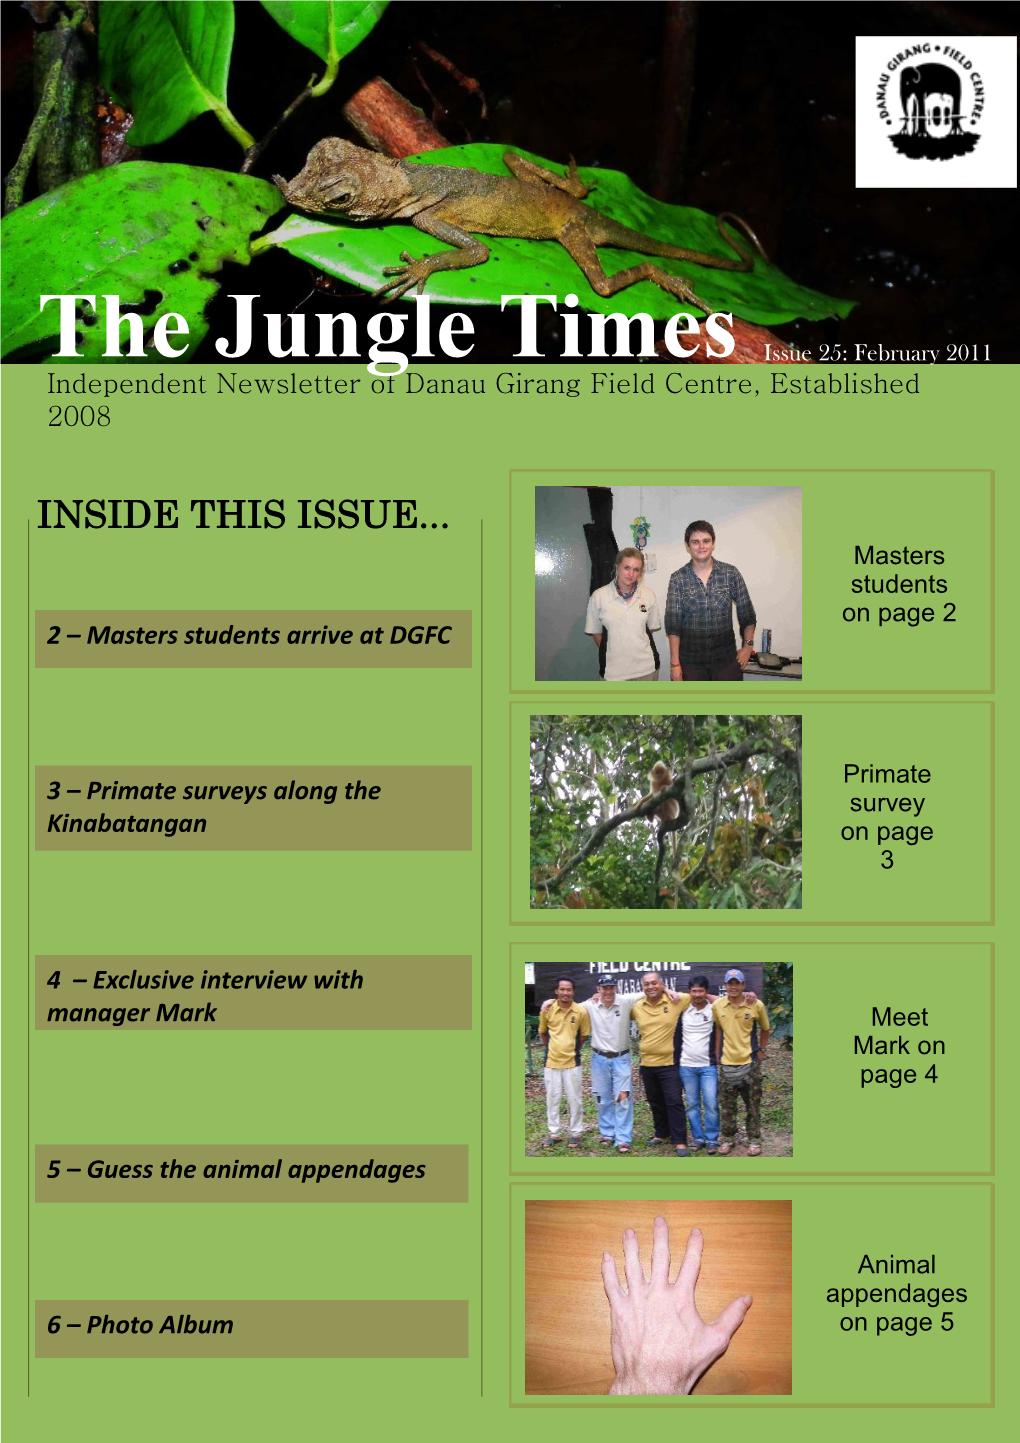 The Jungle Times Issue 25: February 2011 Independent Newsletter of Danau Girang Field Centre, Established 2008